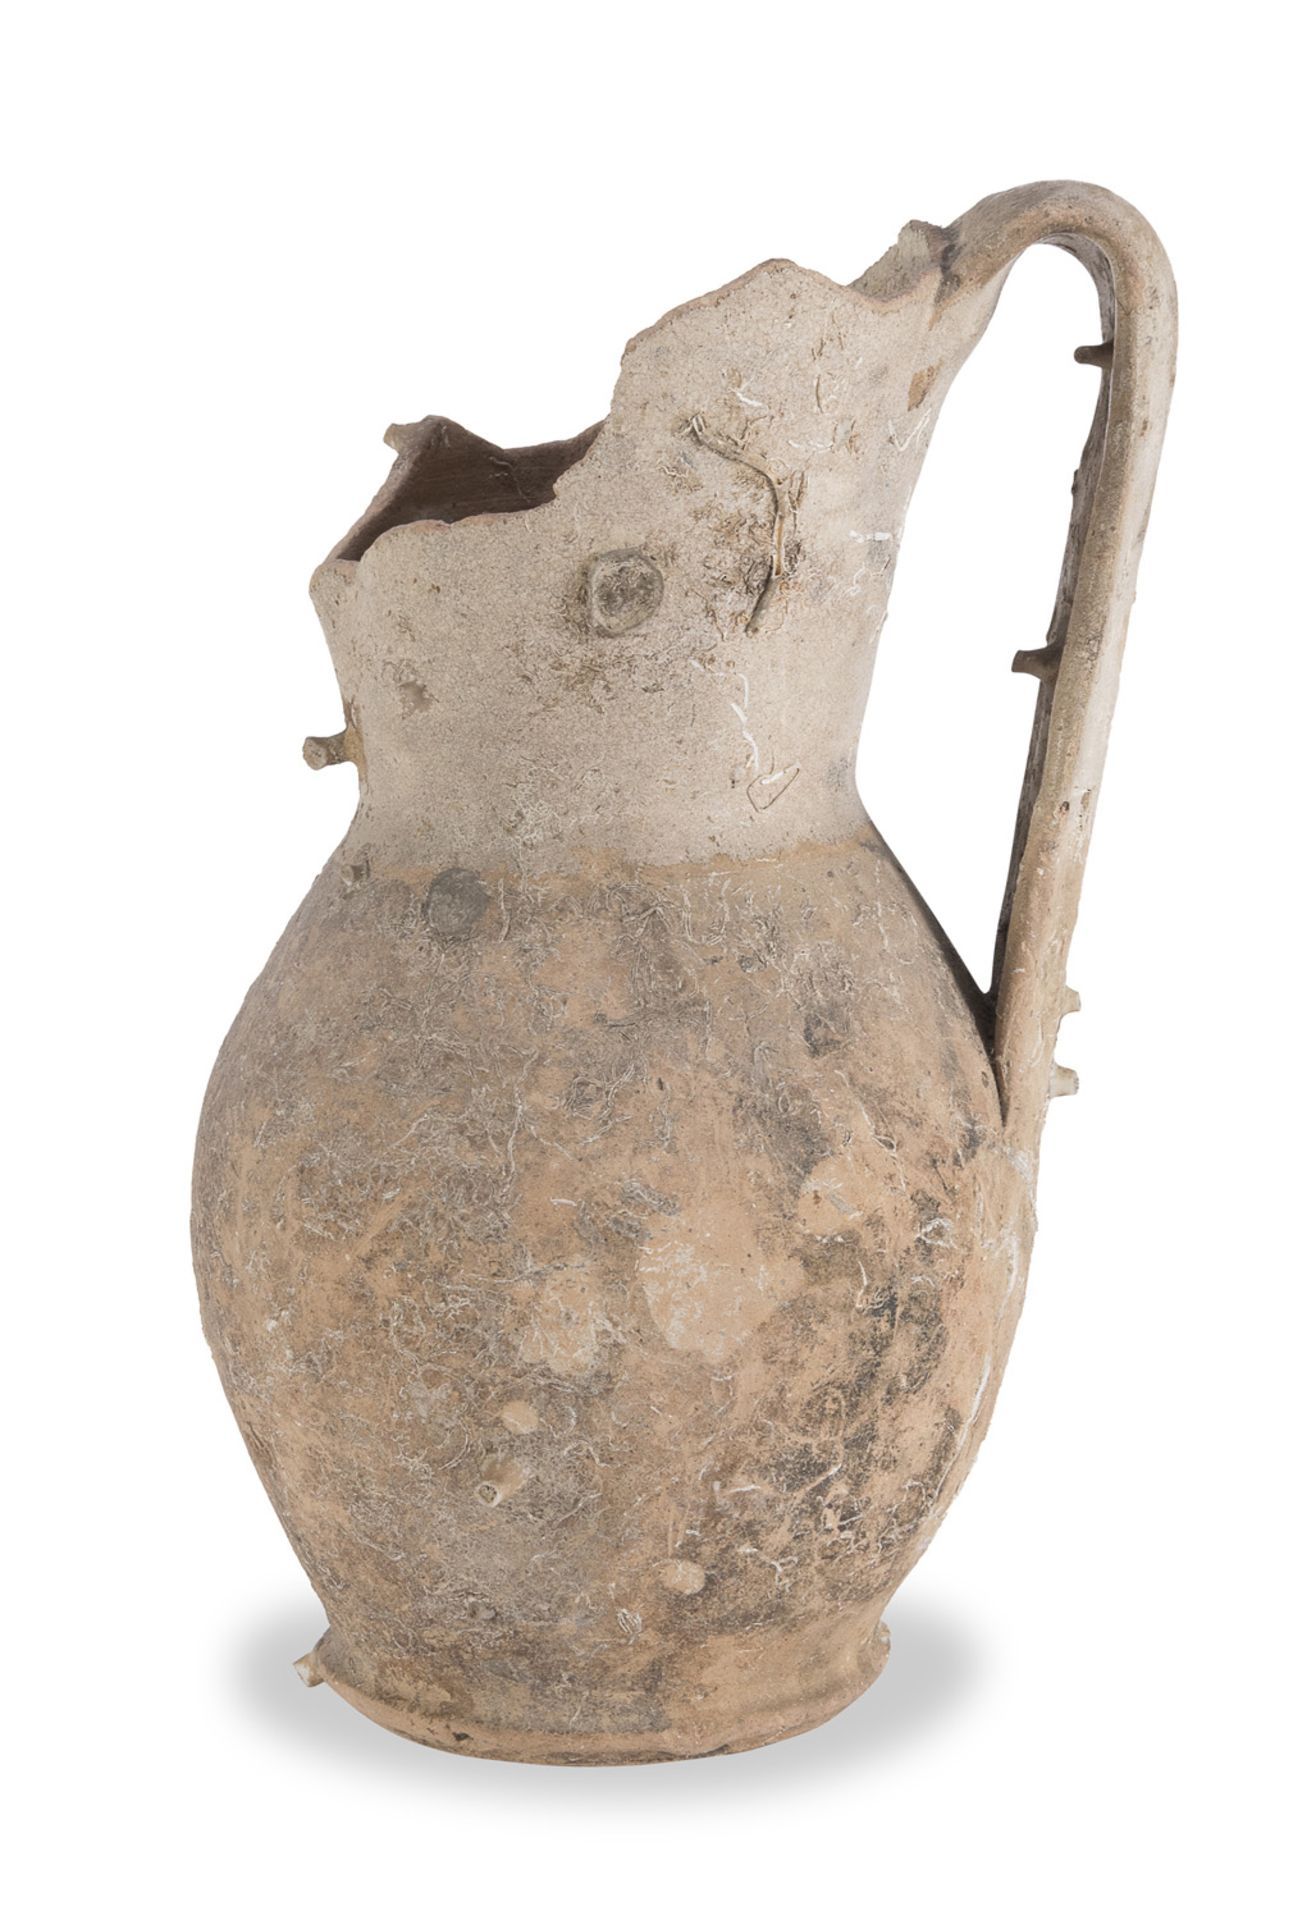 JUG ROMAN PERIOD 1ST-3RD CENTURY (not exportable from Italy)